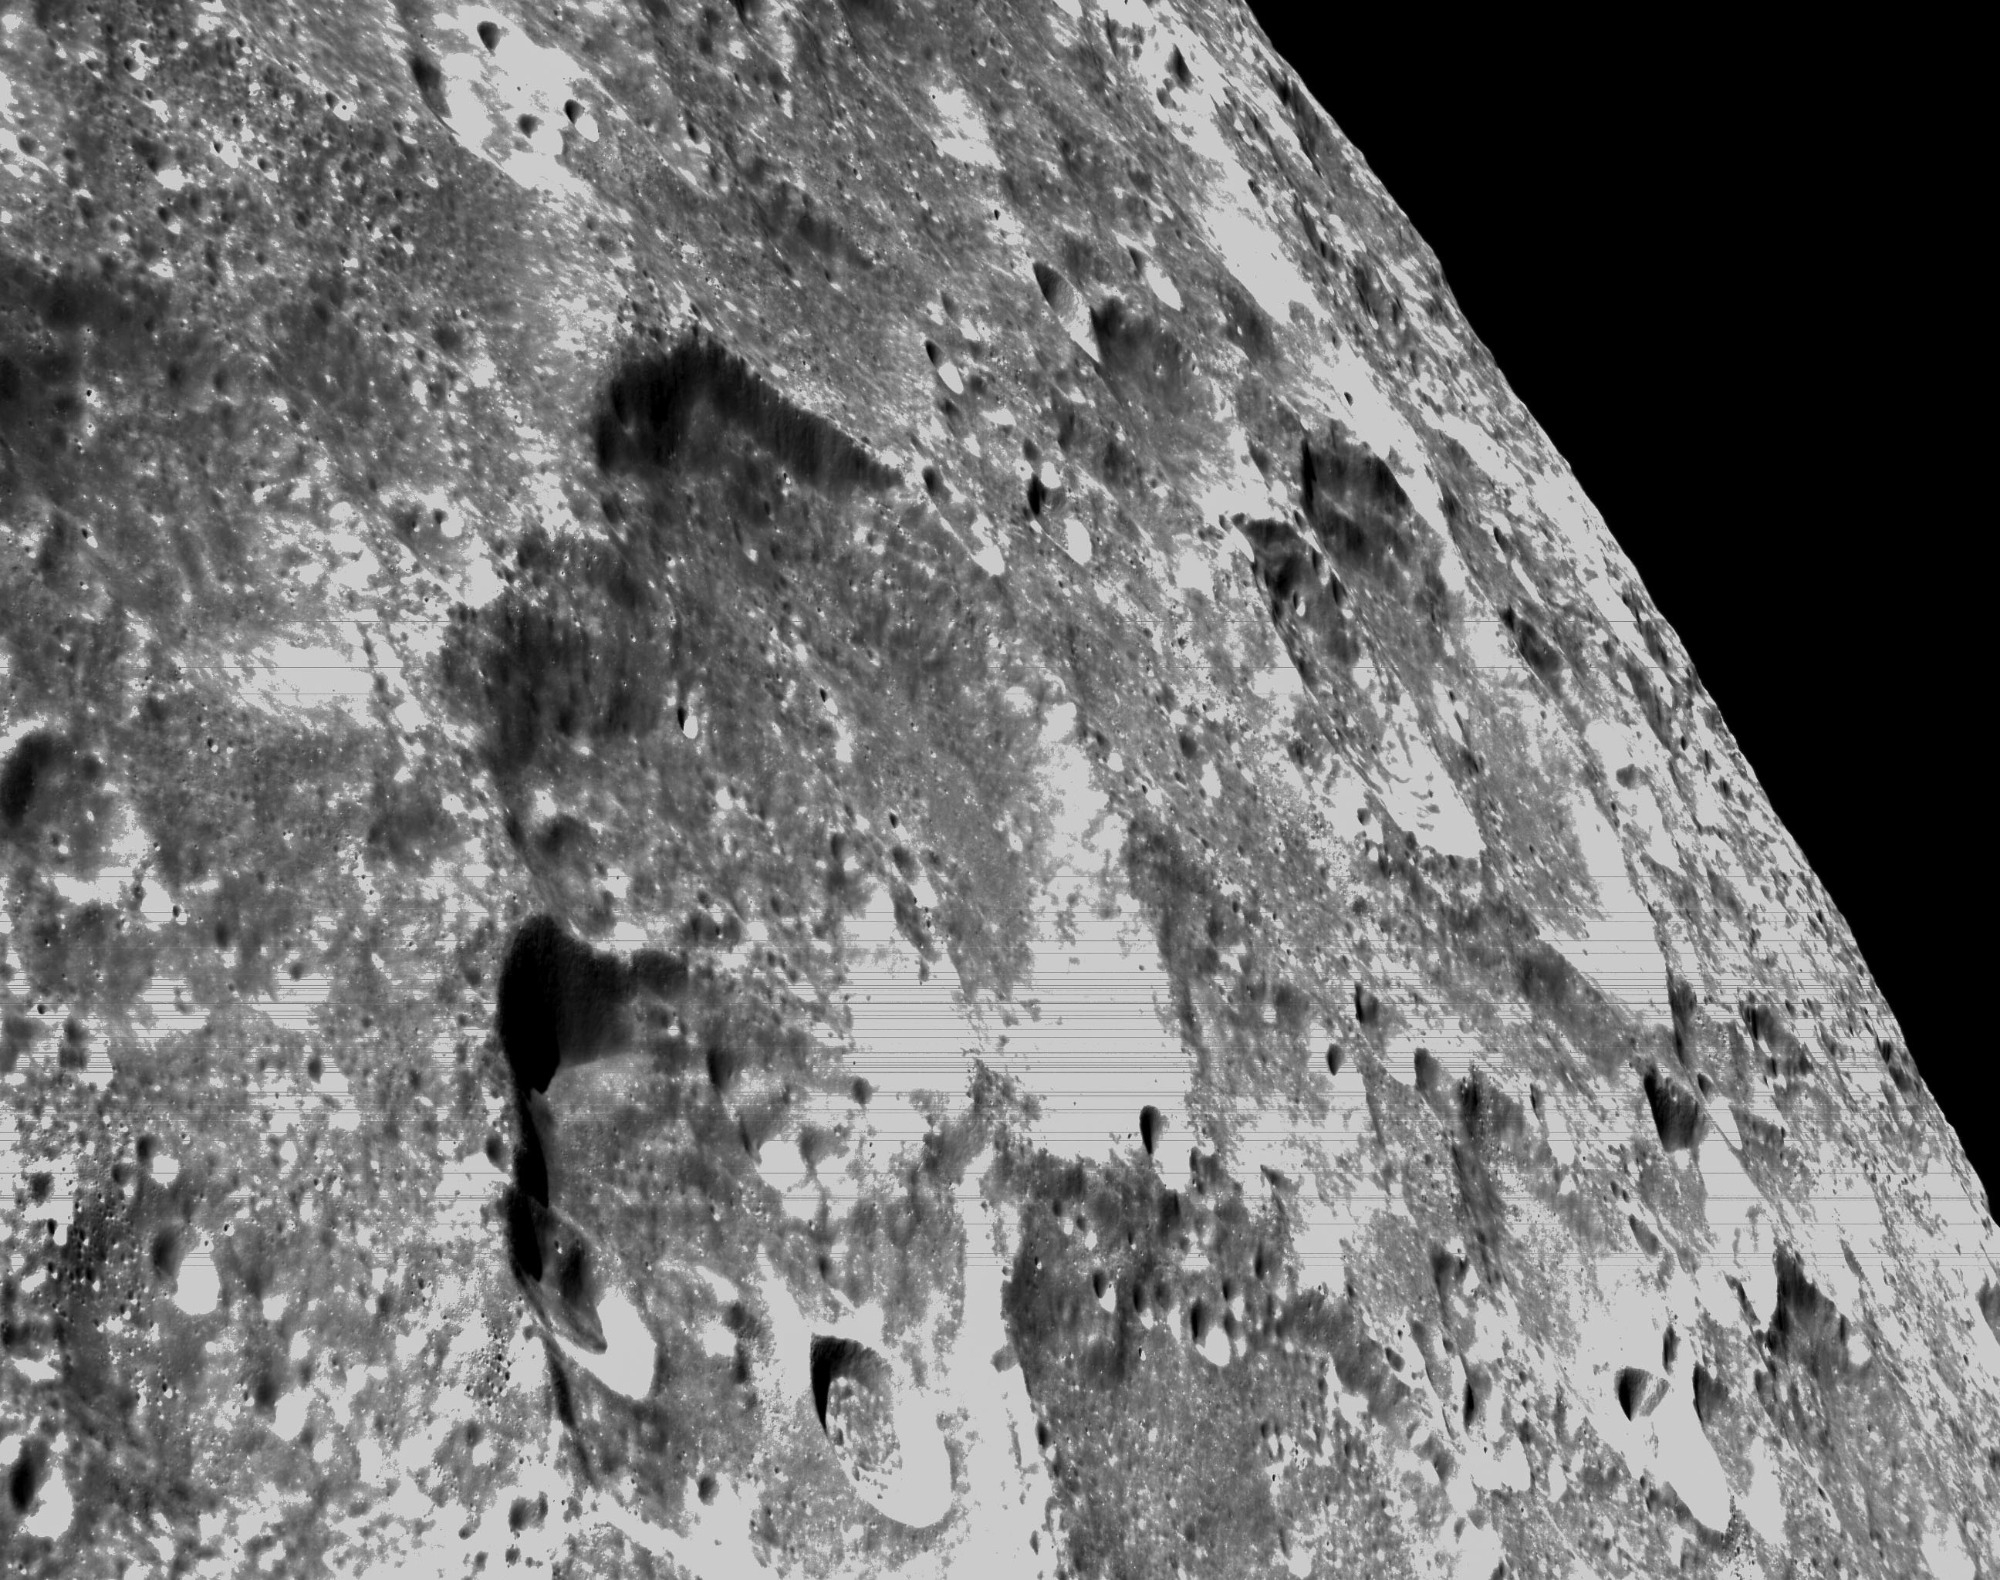 Moon closeup of craters by NASA Orion spacecraft